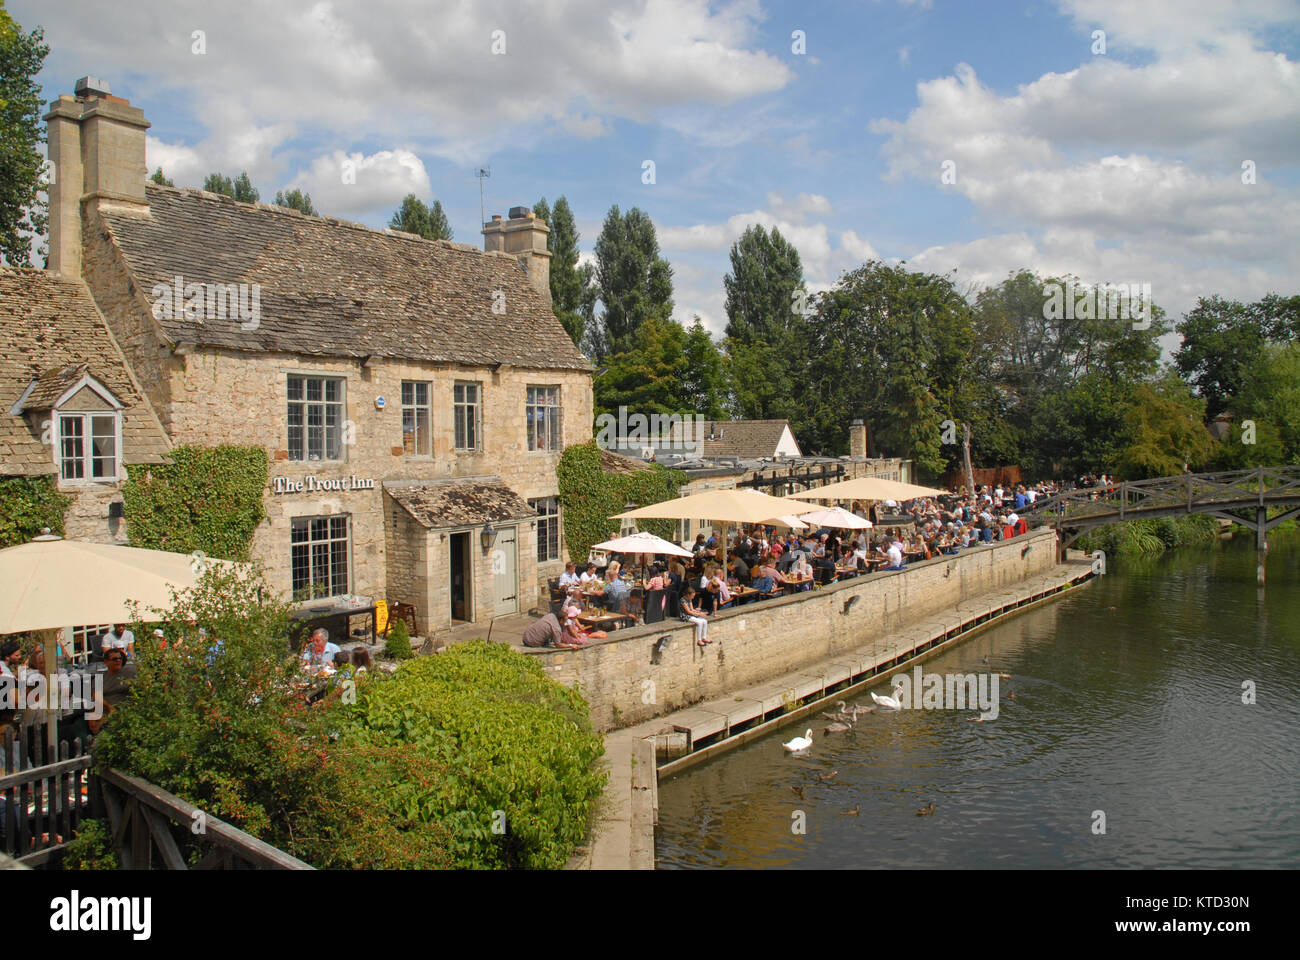 Oxford, United Kingdom - August 16, 2015: The Trout Inn at Port Meadow Stock Photo